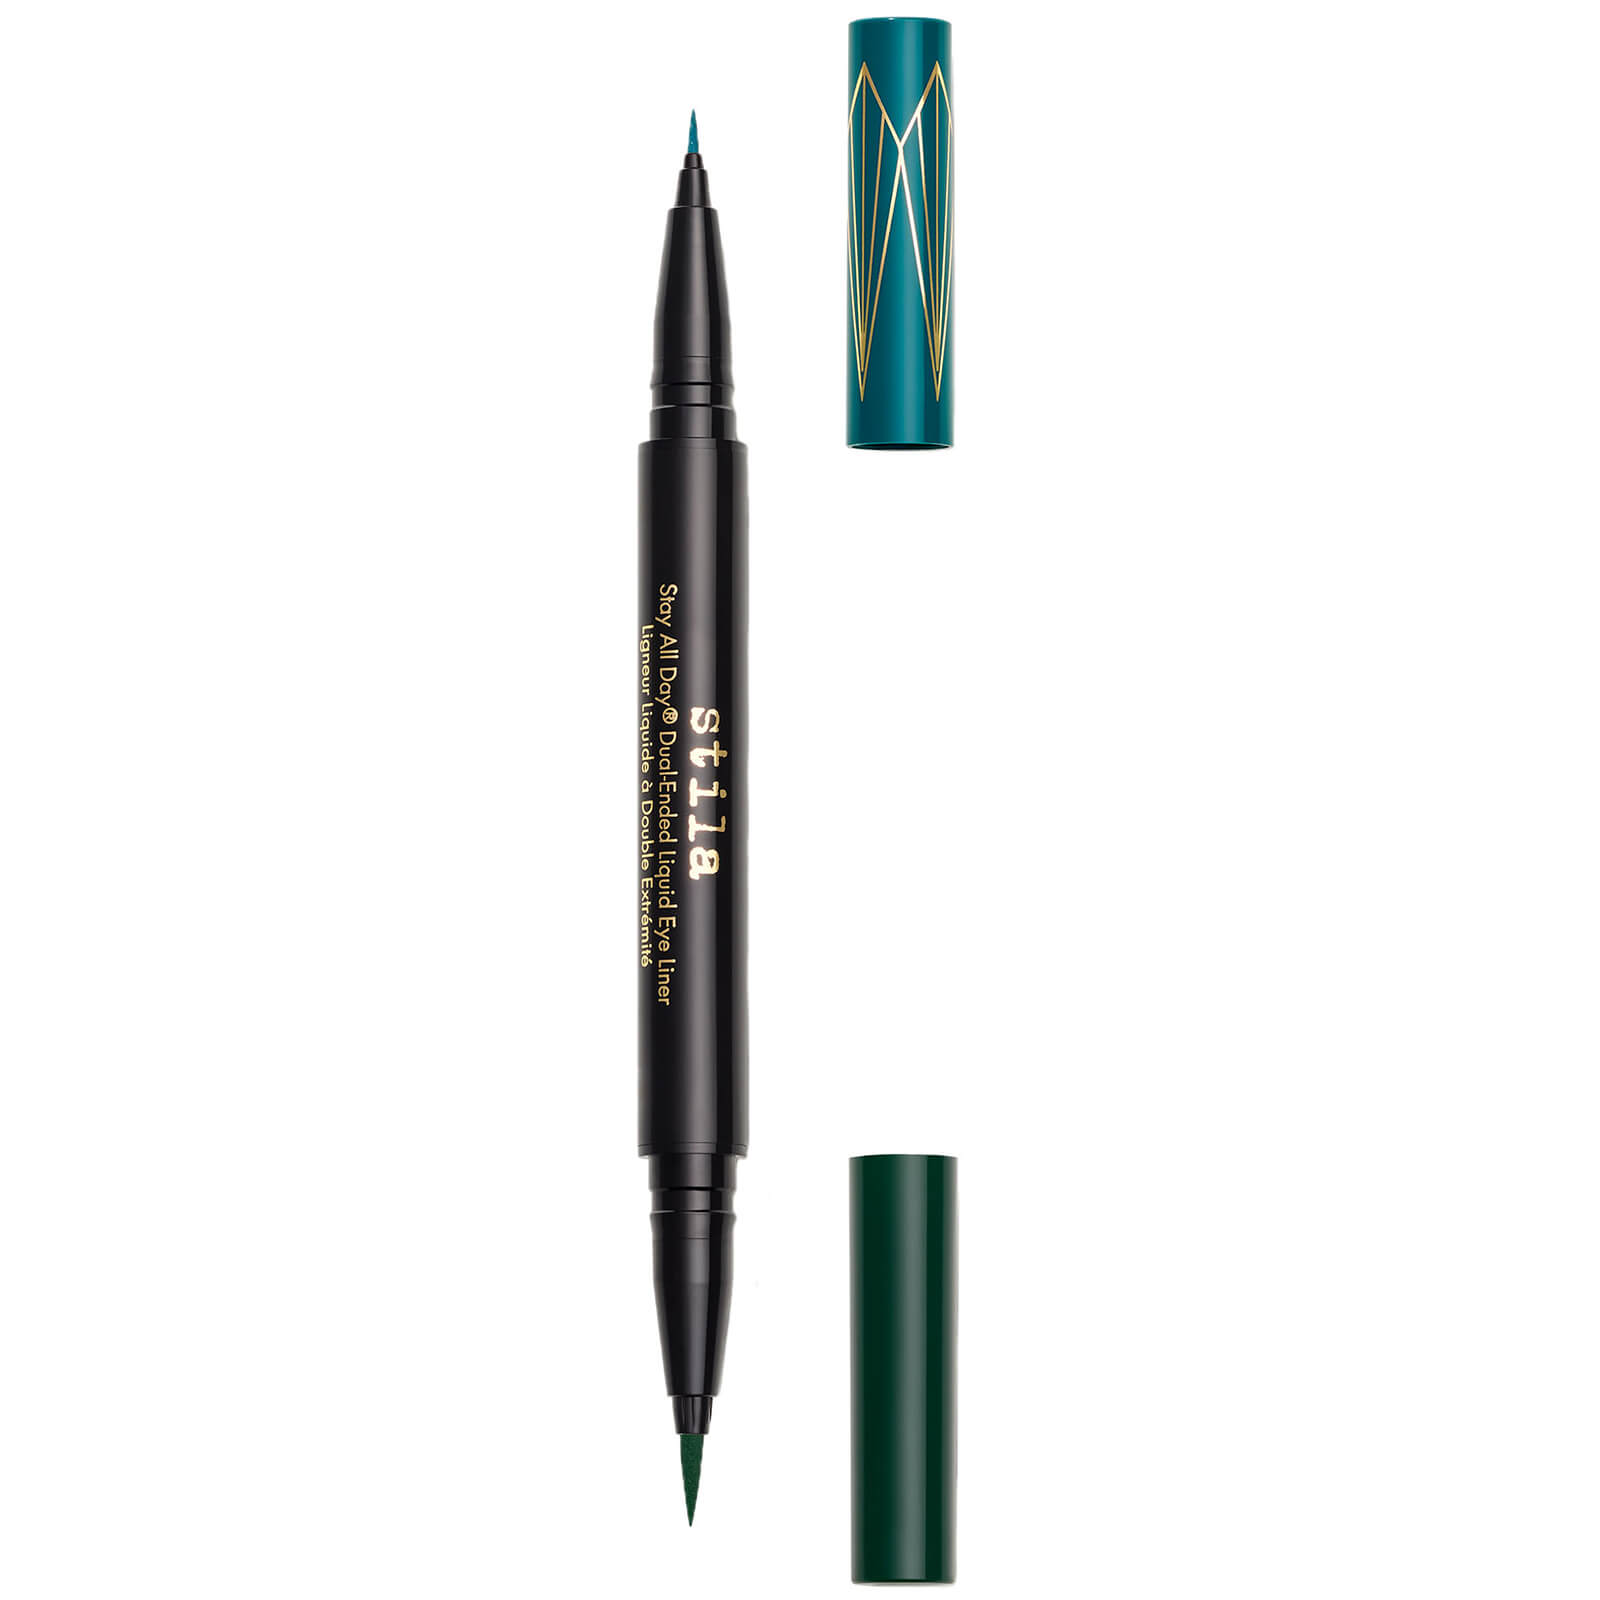 Stila Stay All Day Dual-Ended Liquid Eye Liner 4.5ml (Various Shades) - Teal/Intense Jade